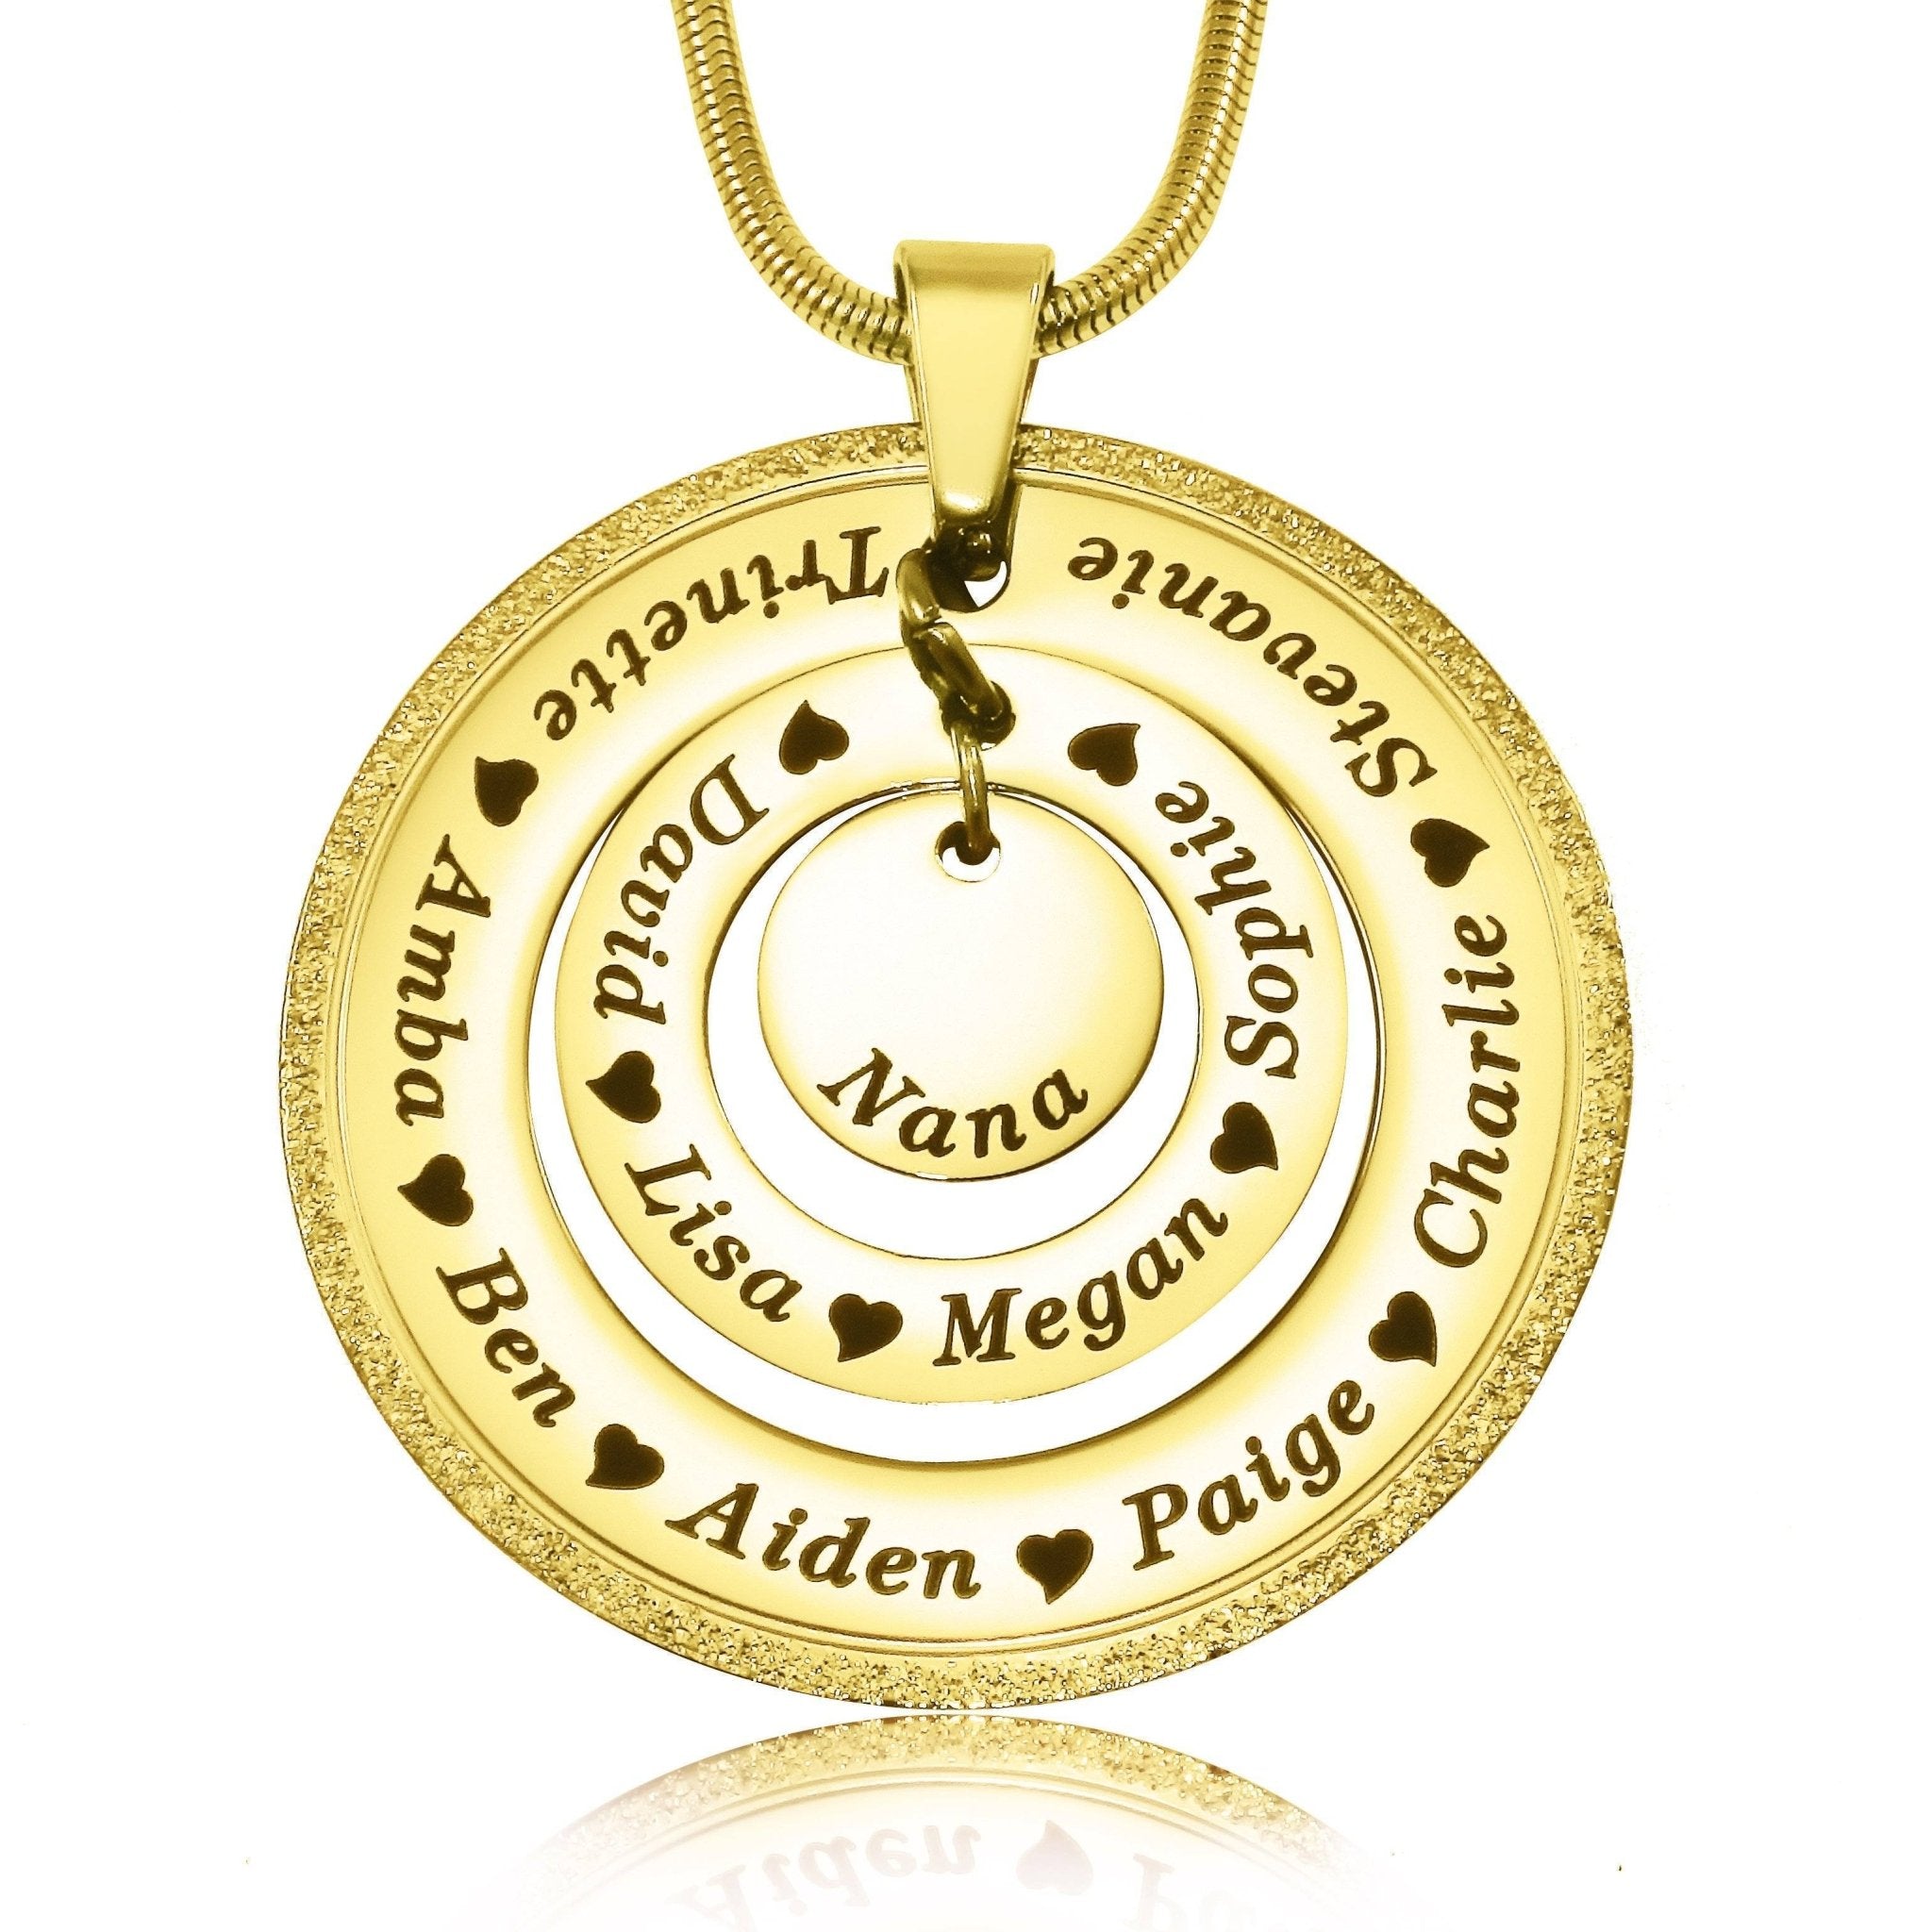 Sparkling Circles of Loved Ones Personalised Necklace - Mothers Jewellery by Belle Fever